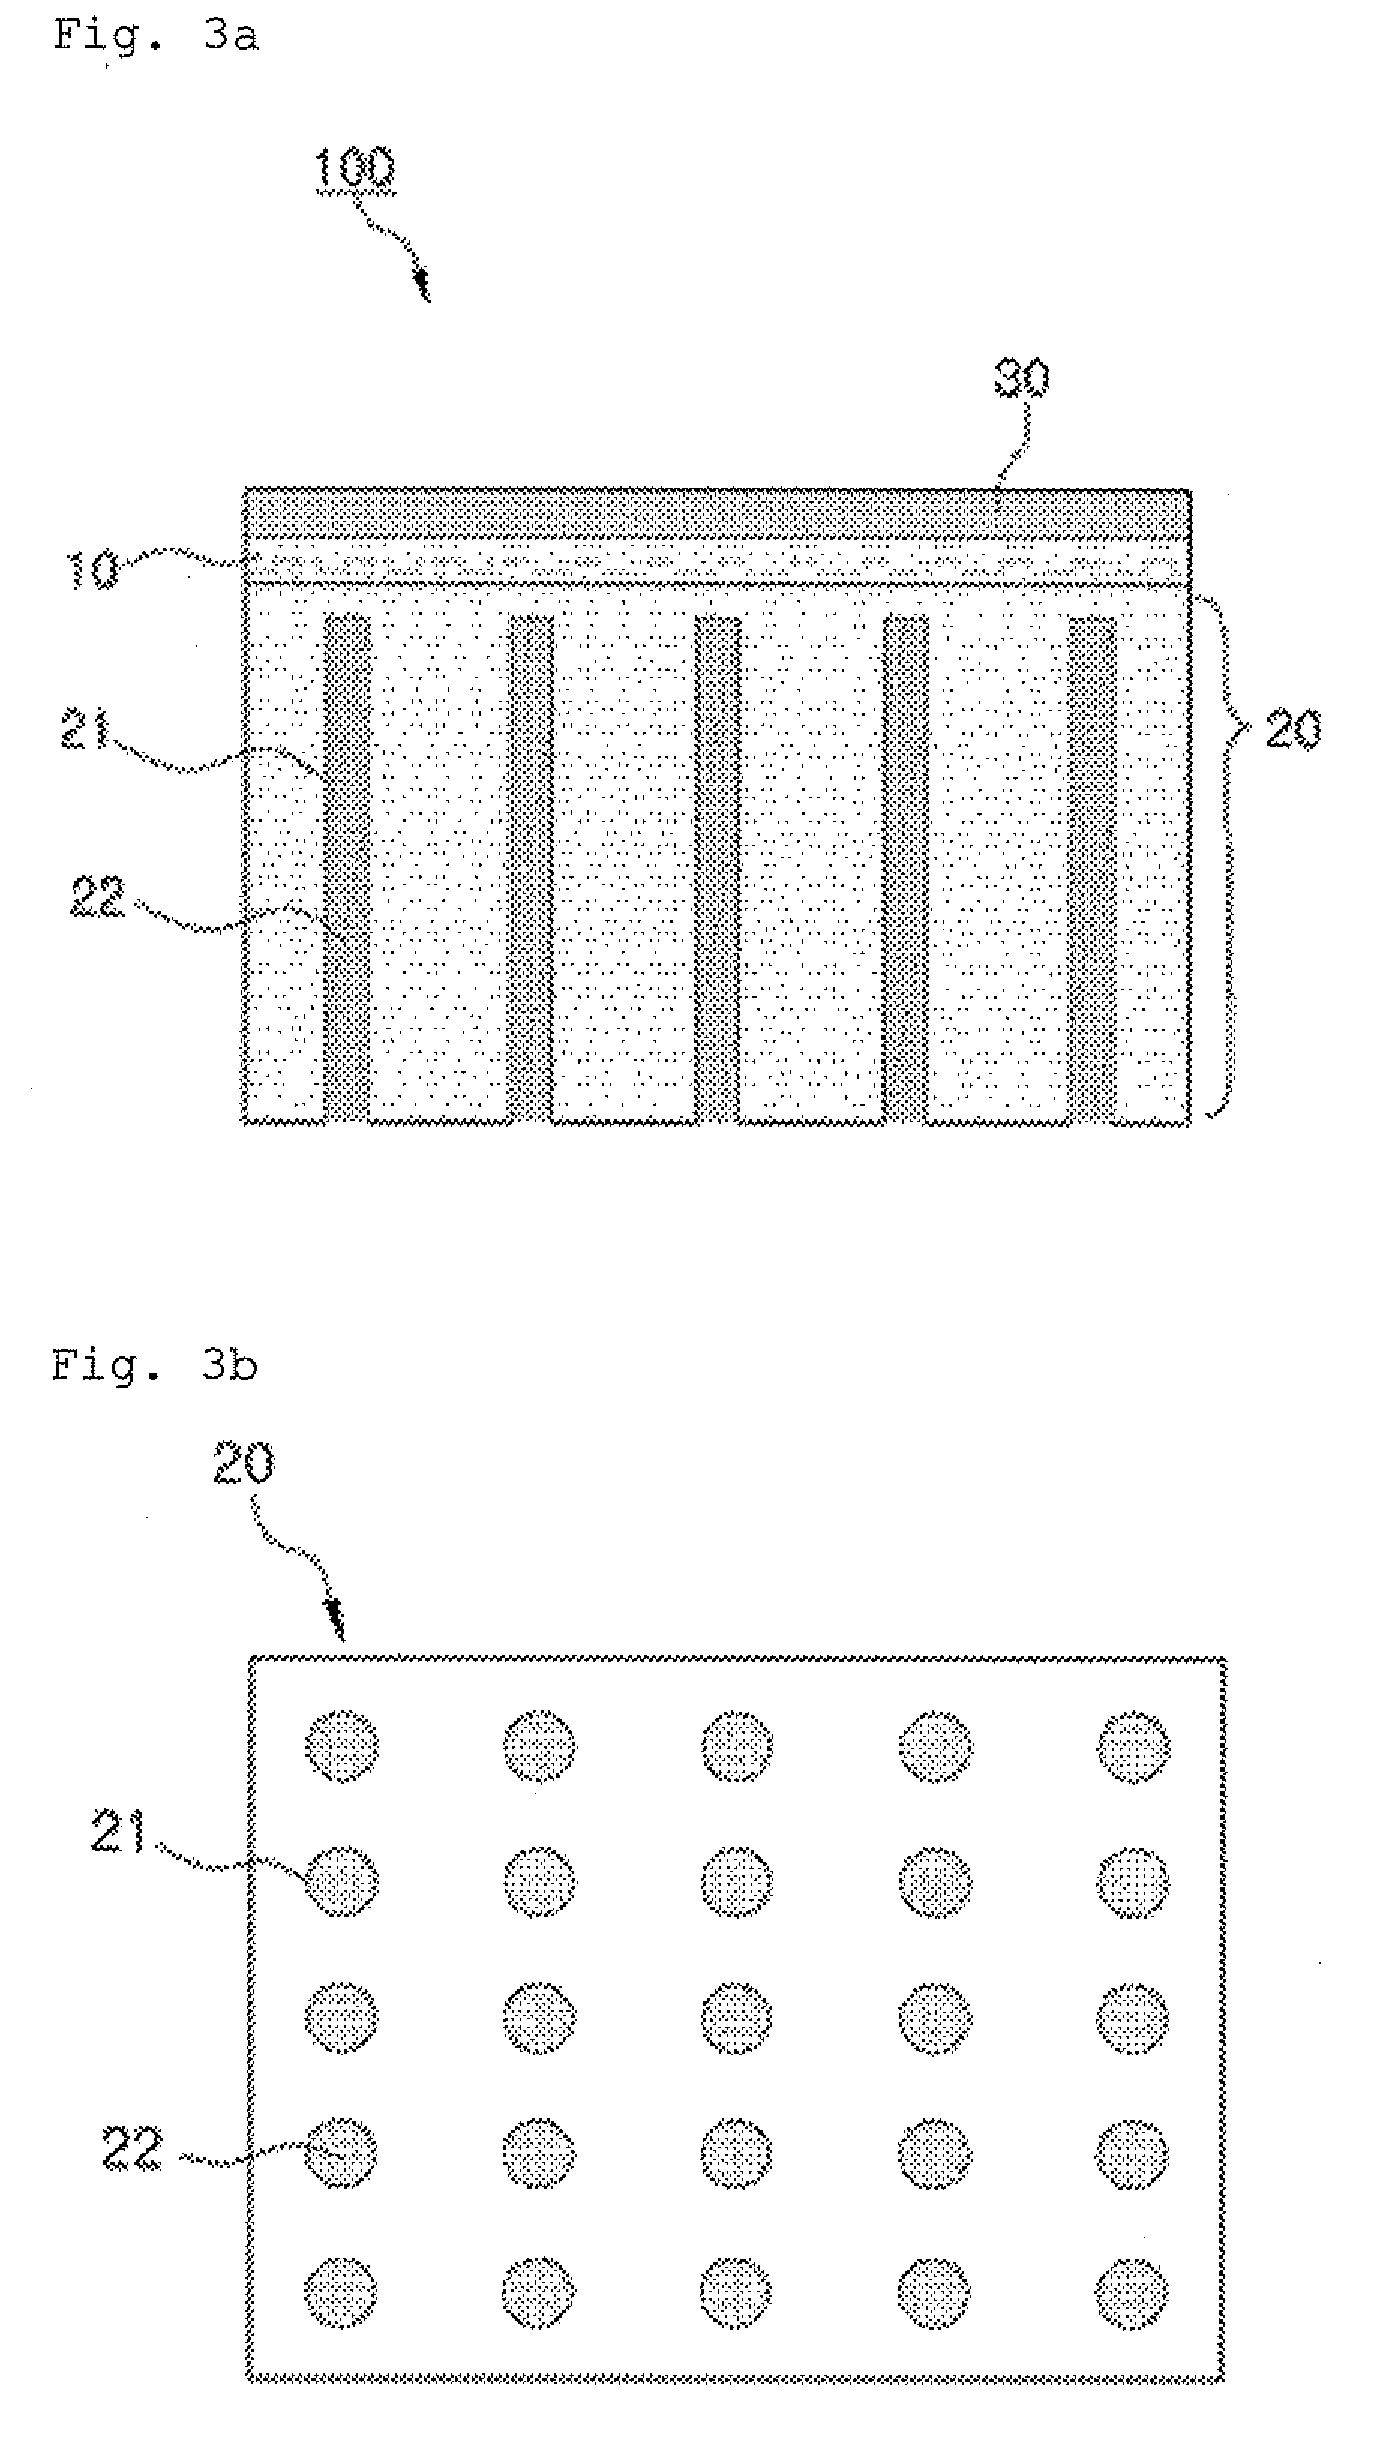 Anode supported solid oxide fuel cell